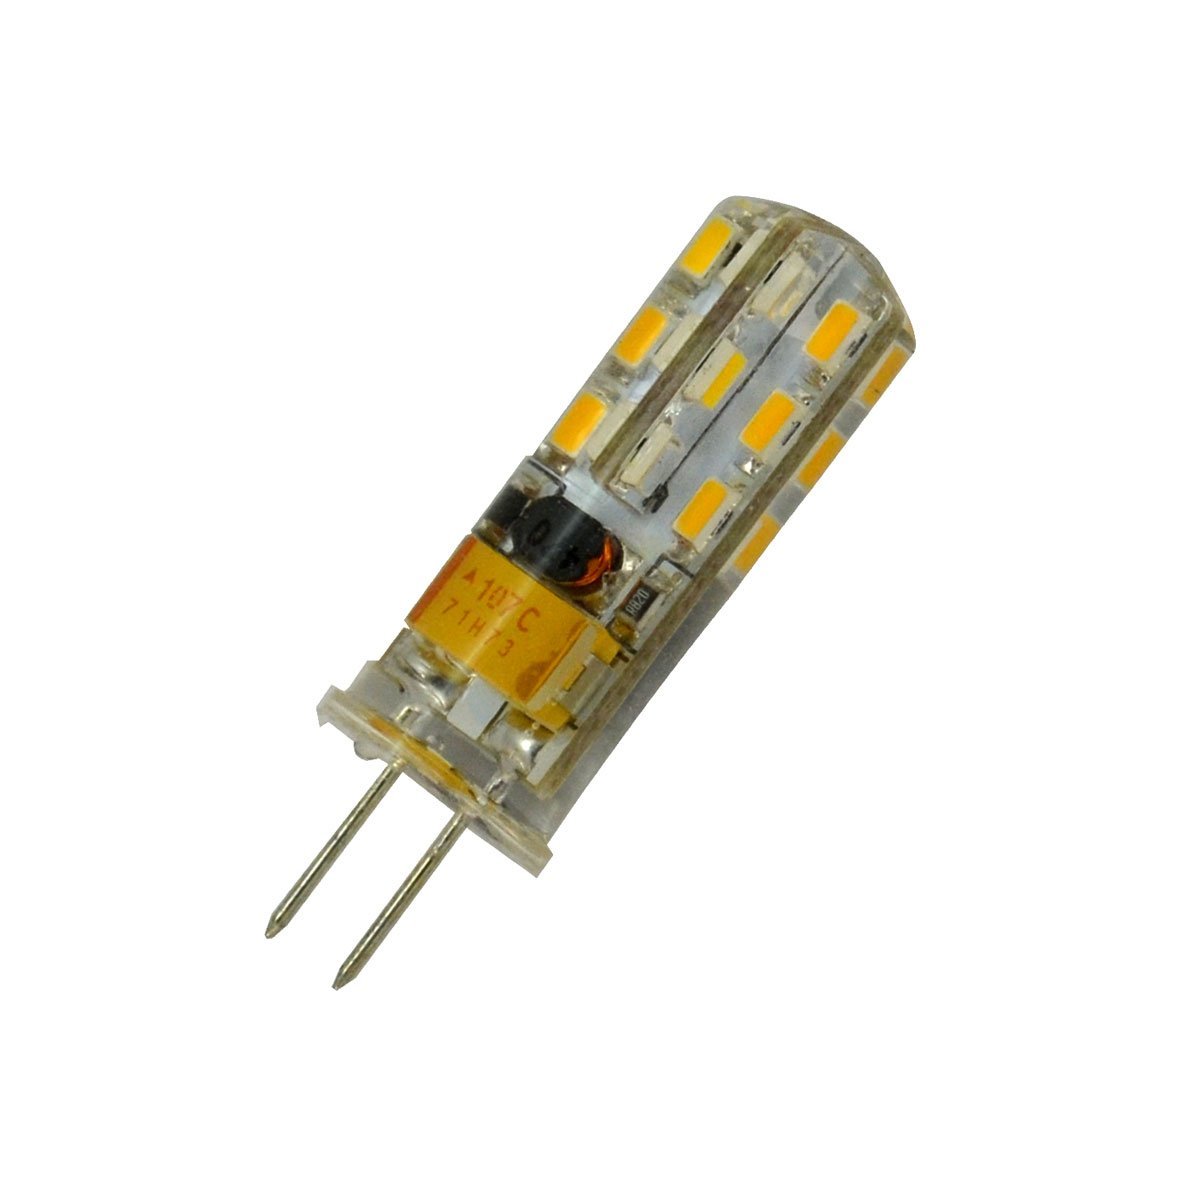 SMD LED Round Bi Pin 12V 1.5W, works on electronic transformers